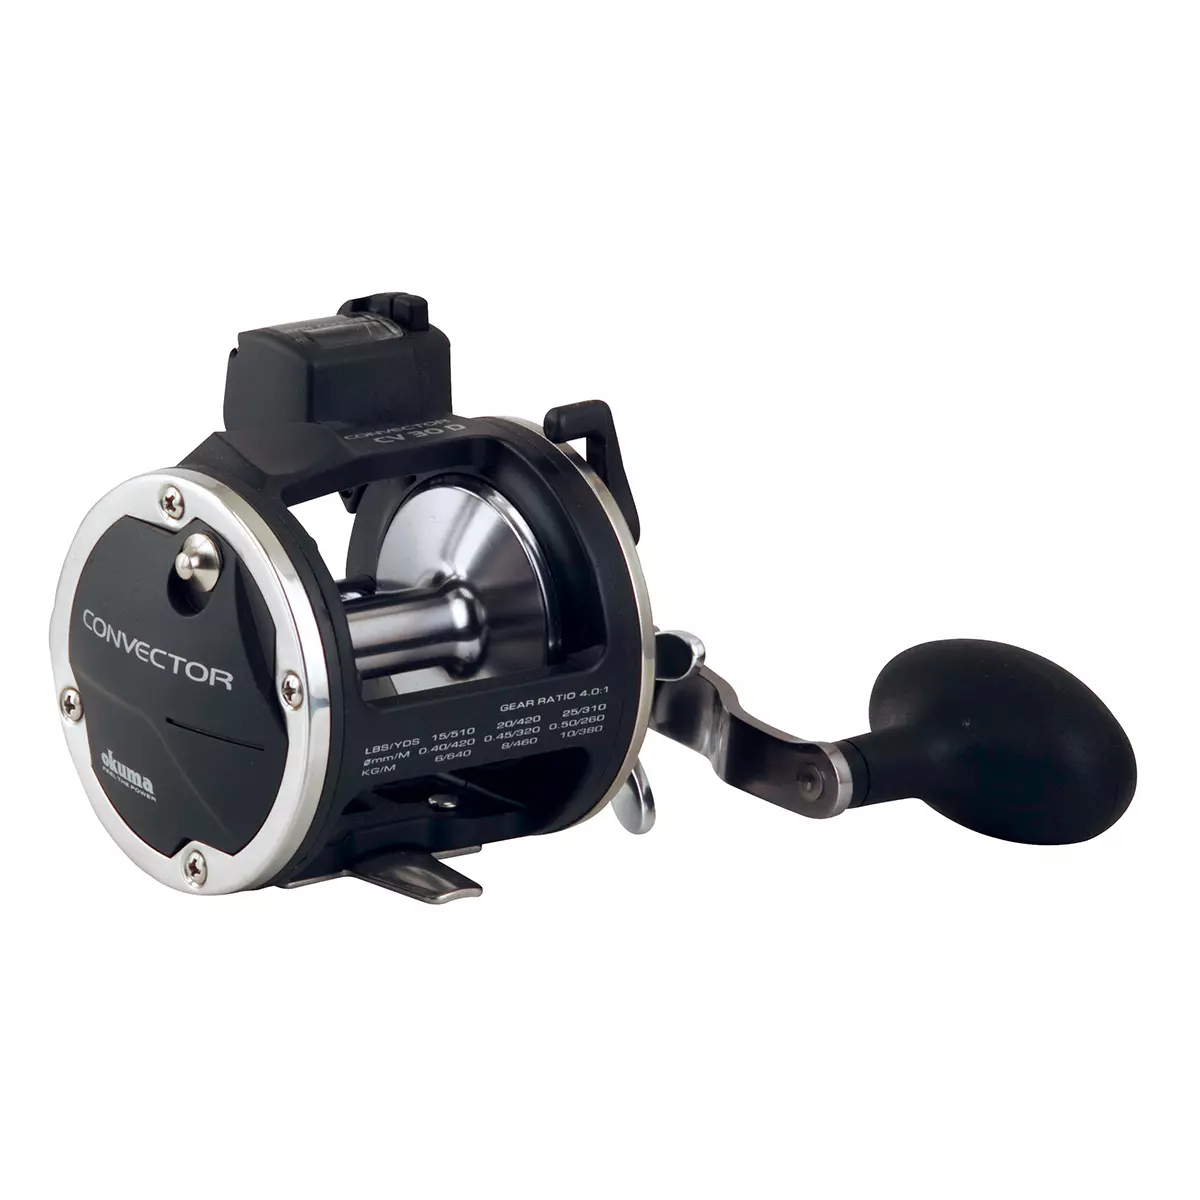  OKUMA CV-163D Convector Lowprofile Reel 2HPB + 1RB, Multi, one  Size : Sports & Outdoors